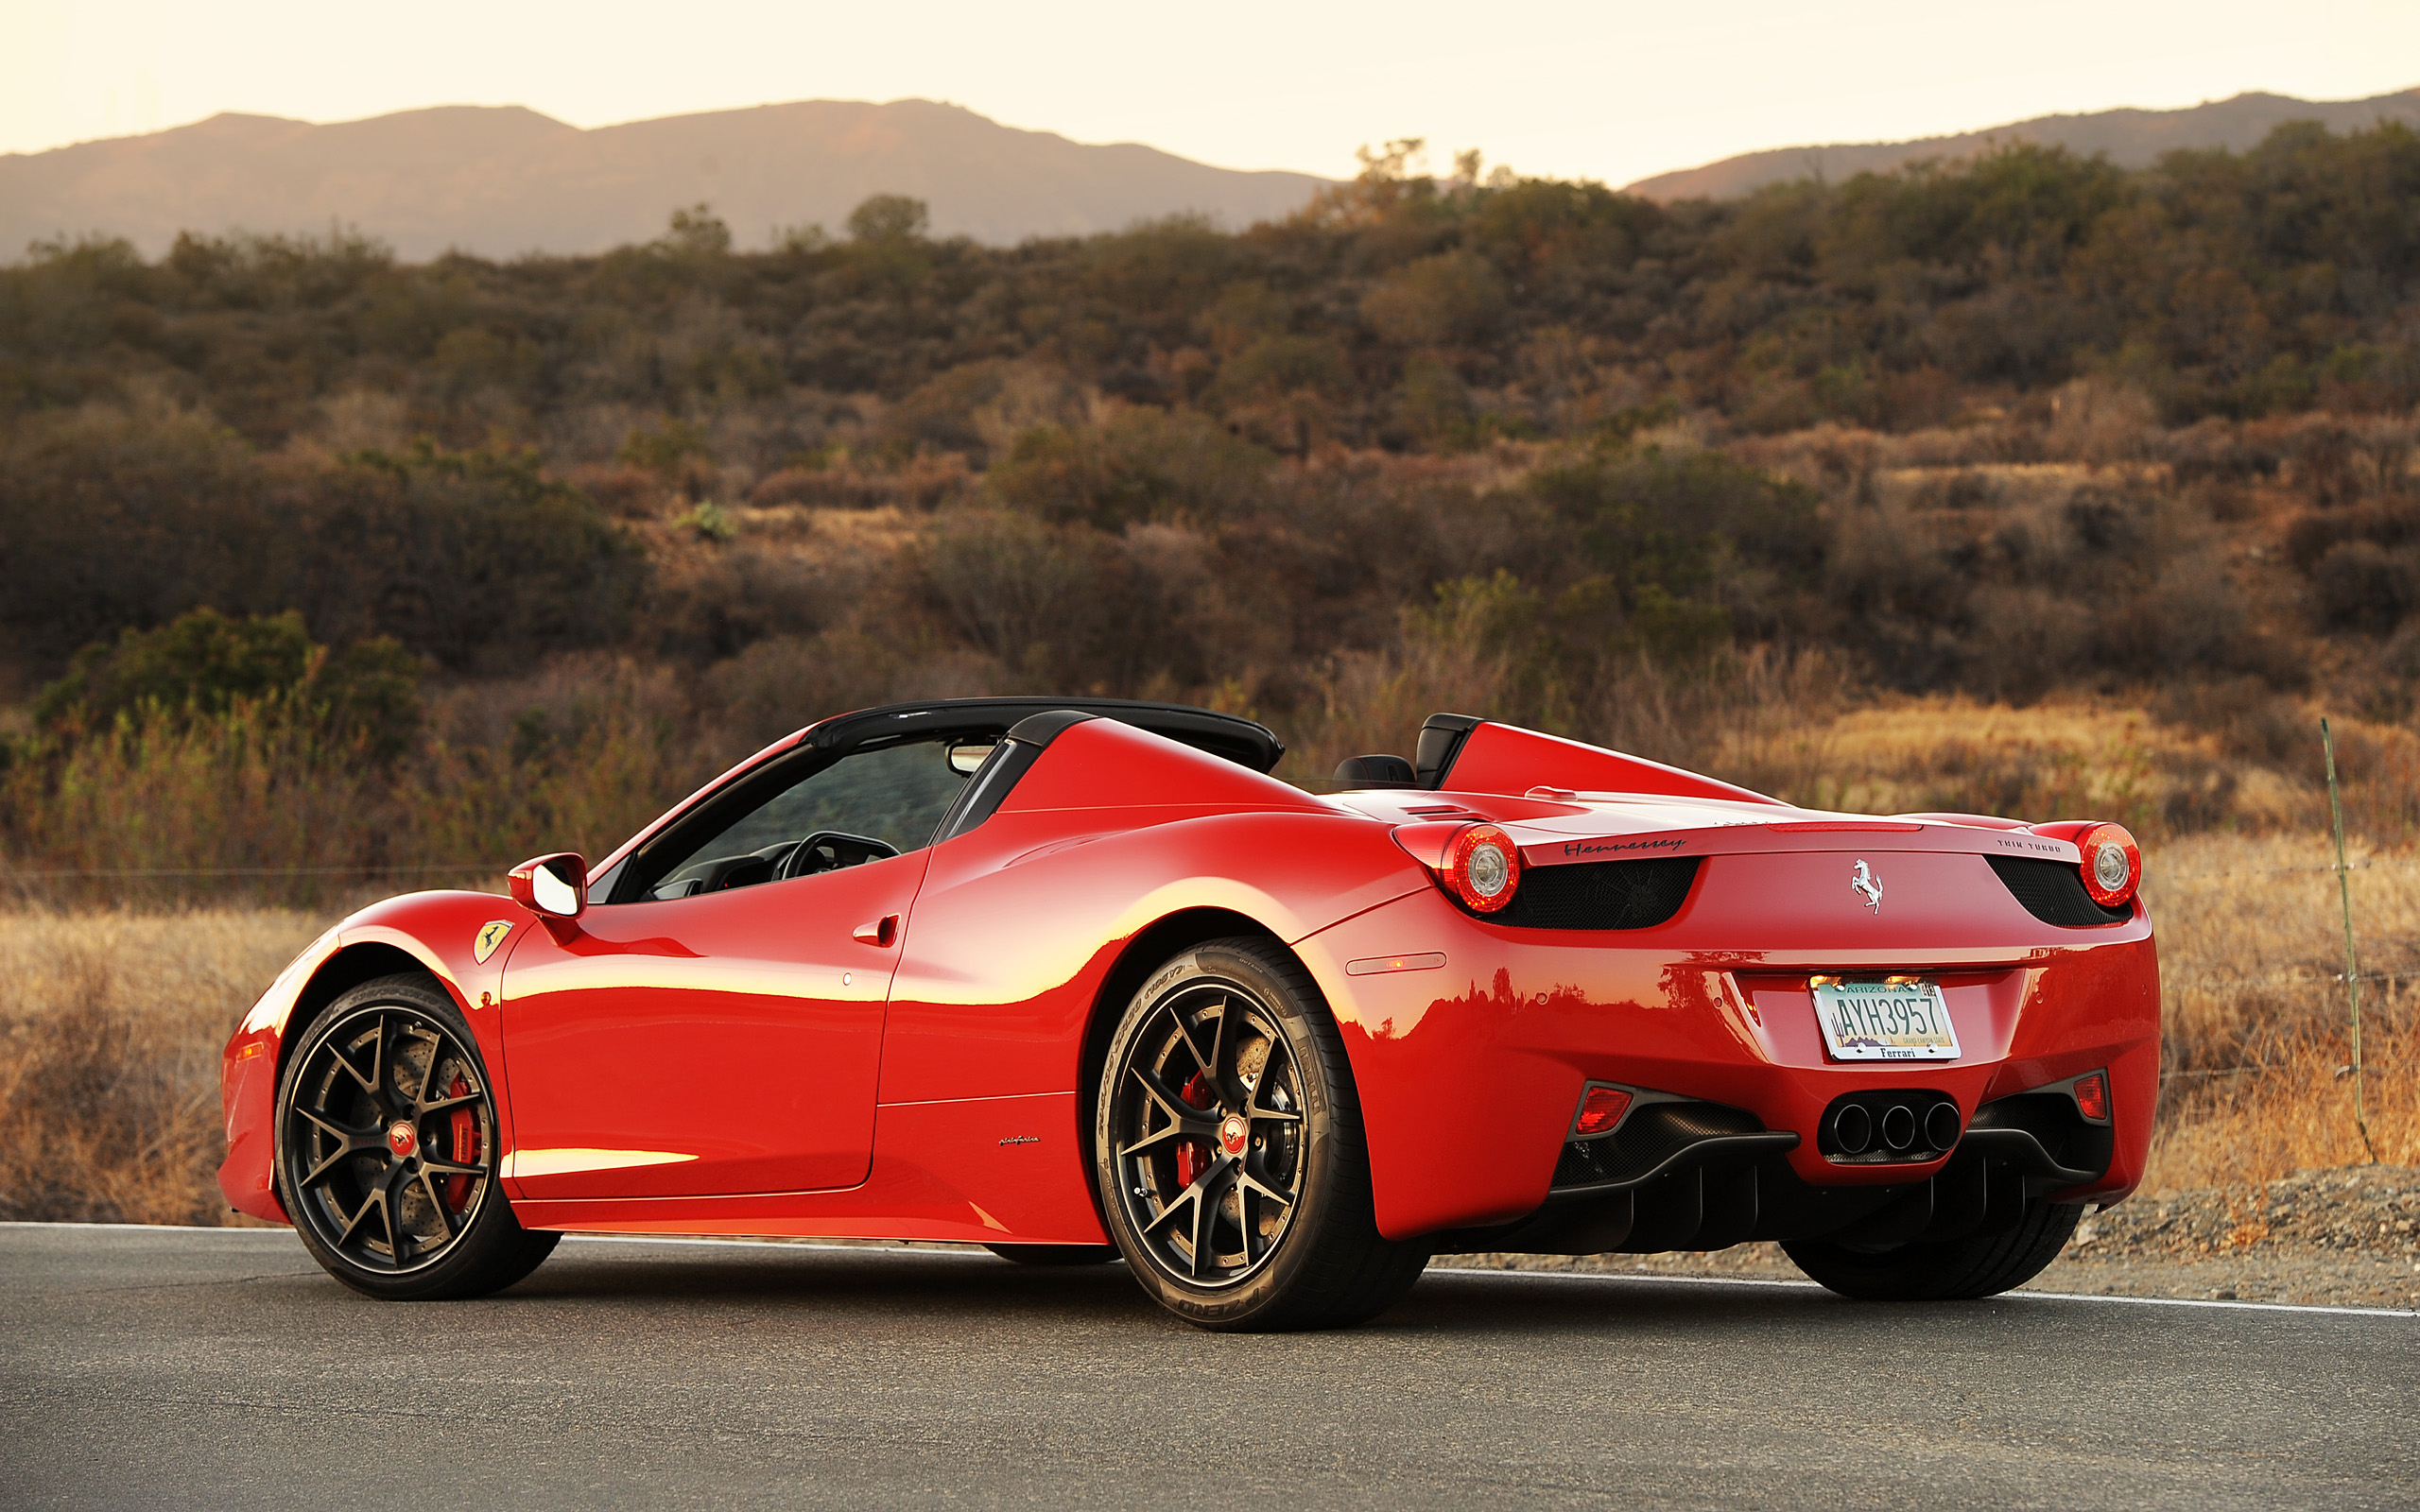  2013 Hennessey HPE700 Twin Turbo 458 Wallpaper.